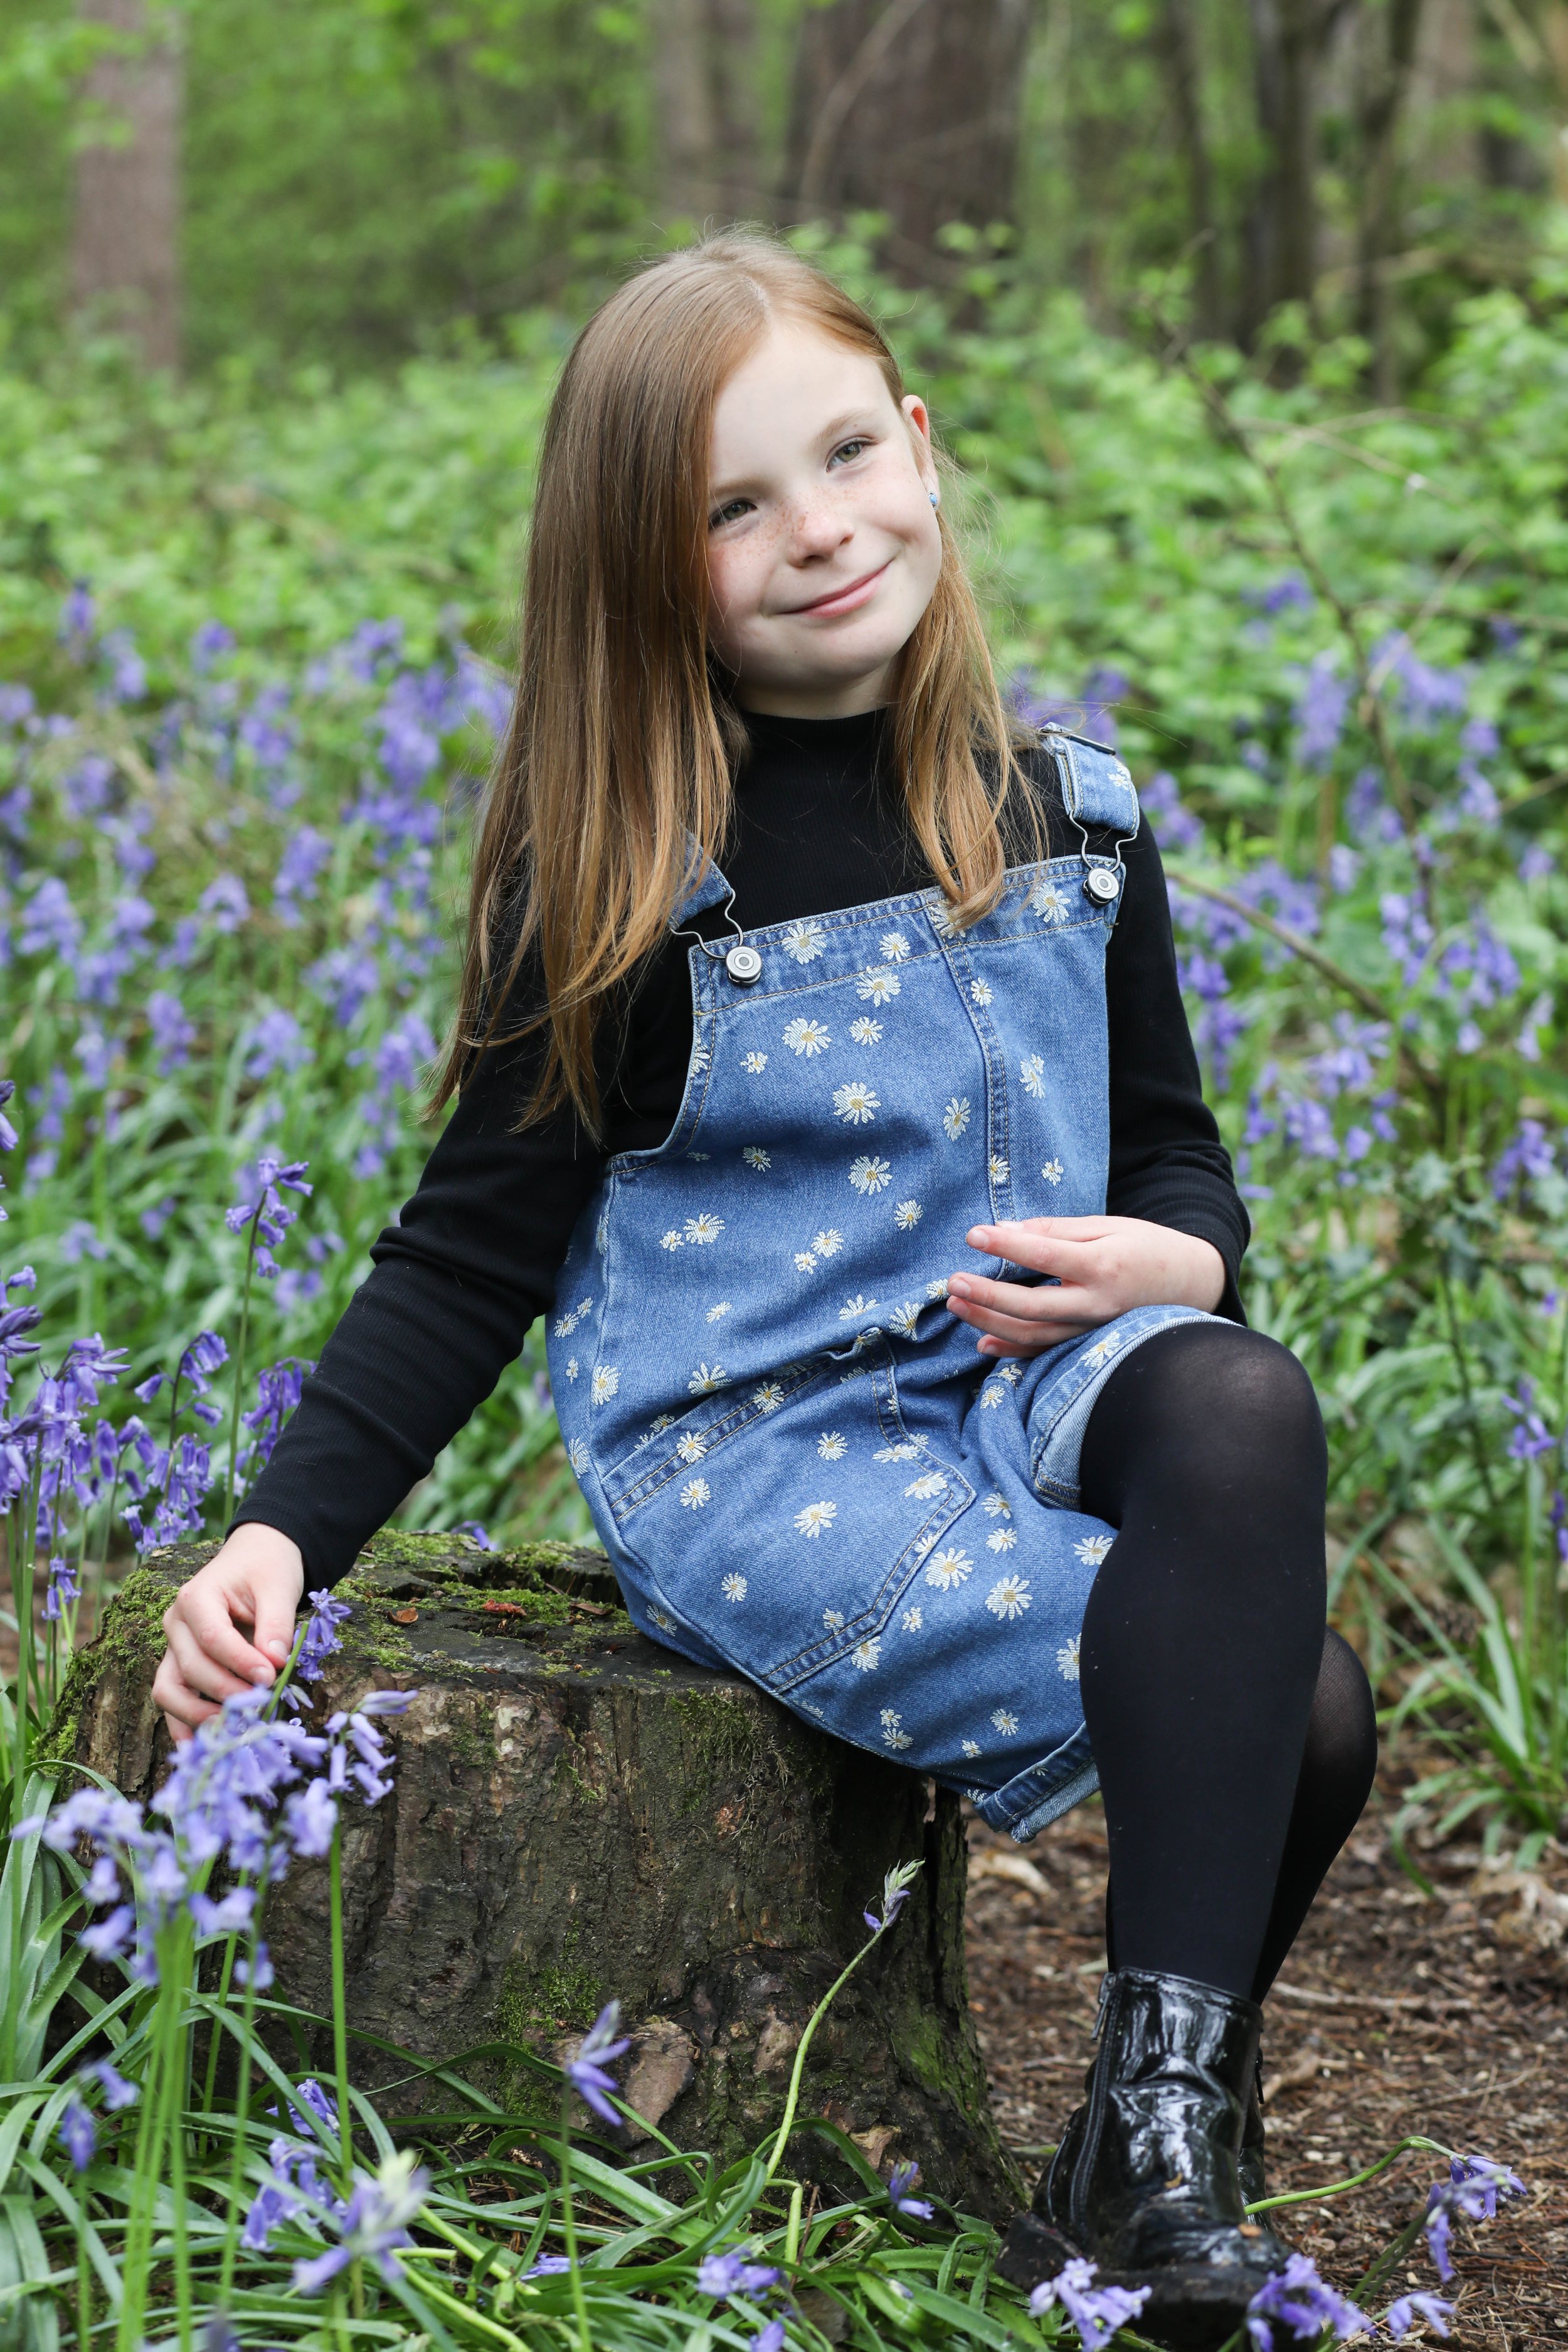 MUM AND DAUGHTER PHOTO SHOOT IN THE BLUEBELLS | BERKSHIRE PORTRAIT SHOOTS42 choice .JPG